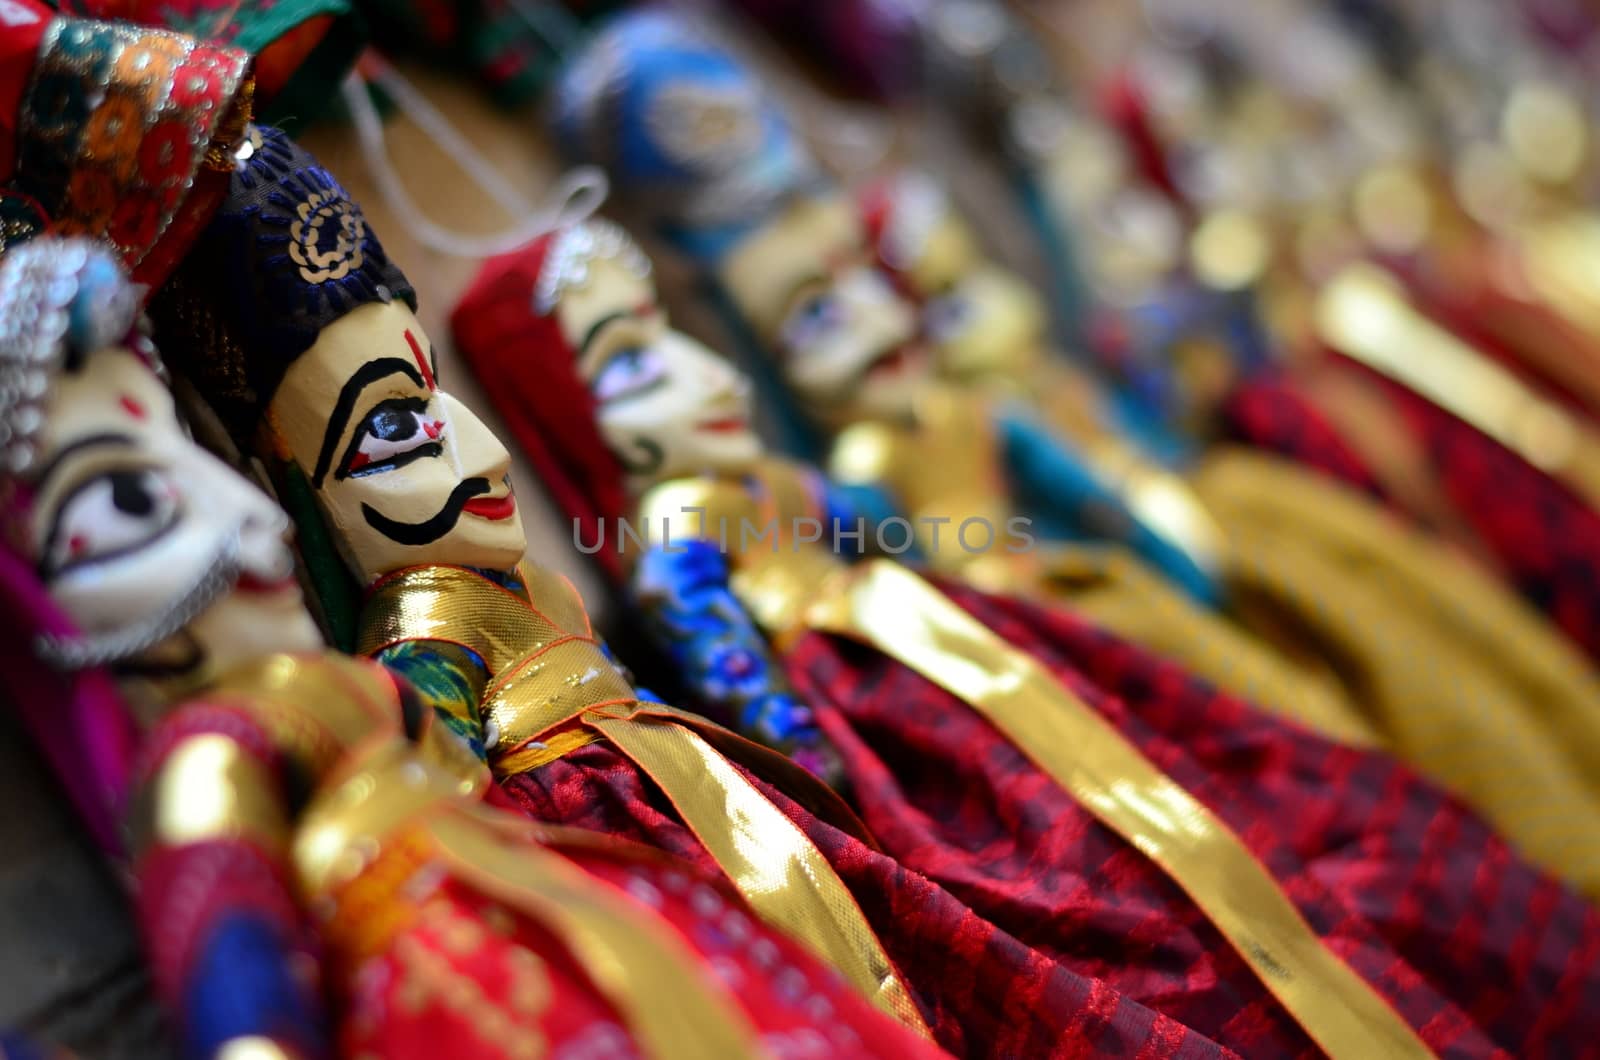 Rajasthani puppets (Kathputli) on display at shop in Mehrangarh Fort in Jodhpur. Kathputli is a string puppet theatre, native to Rajasthan, India, and is the most popular form of Indian puppetry. by jayantbahel